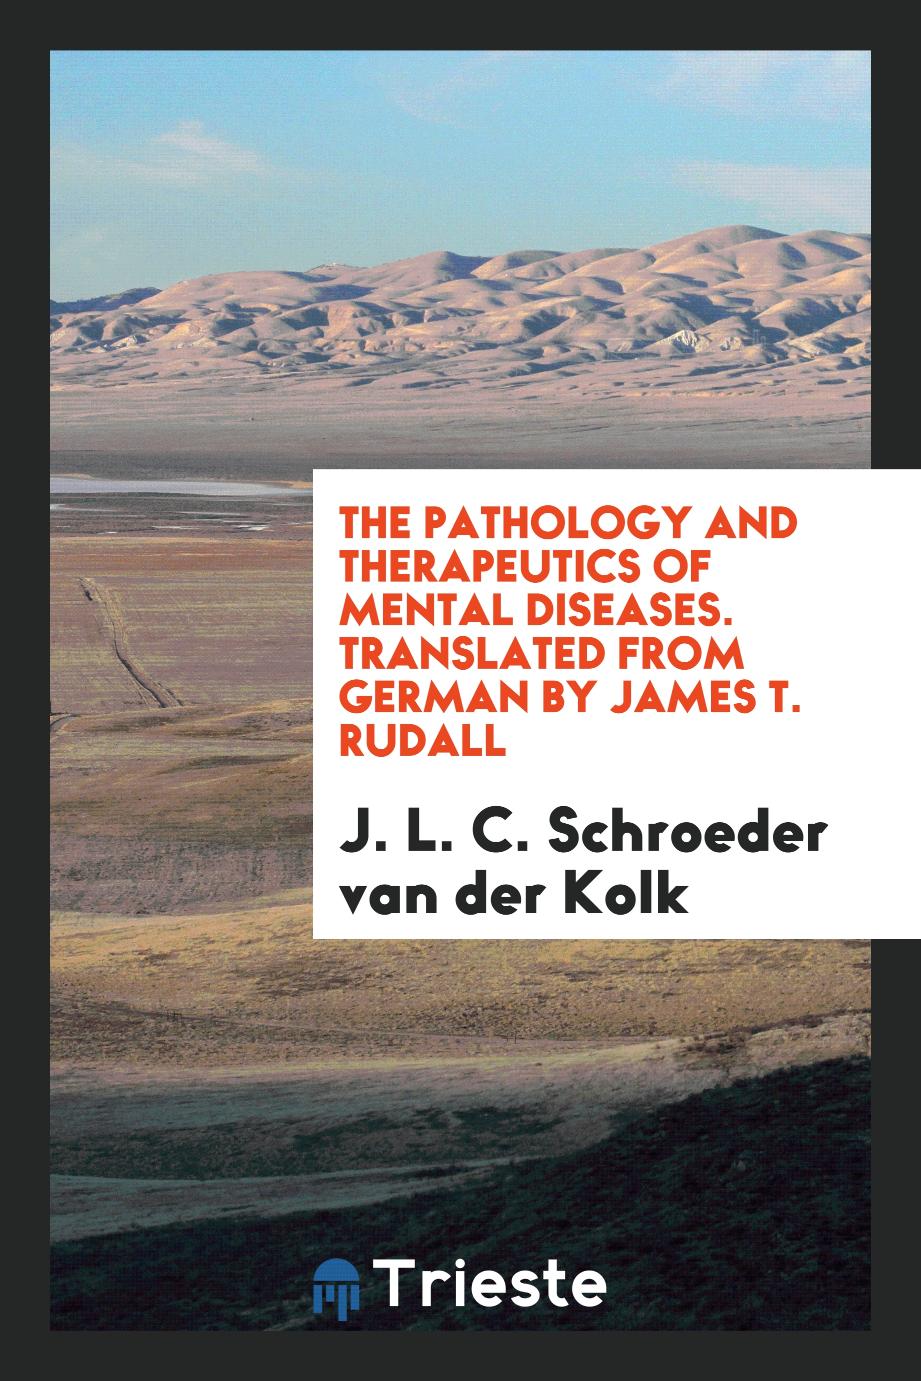 The Pathology and Therapeutics of Mental Diseases. Translated from German by James T. Rudall